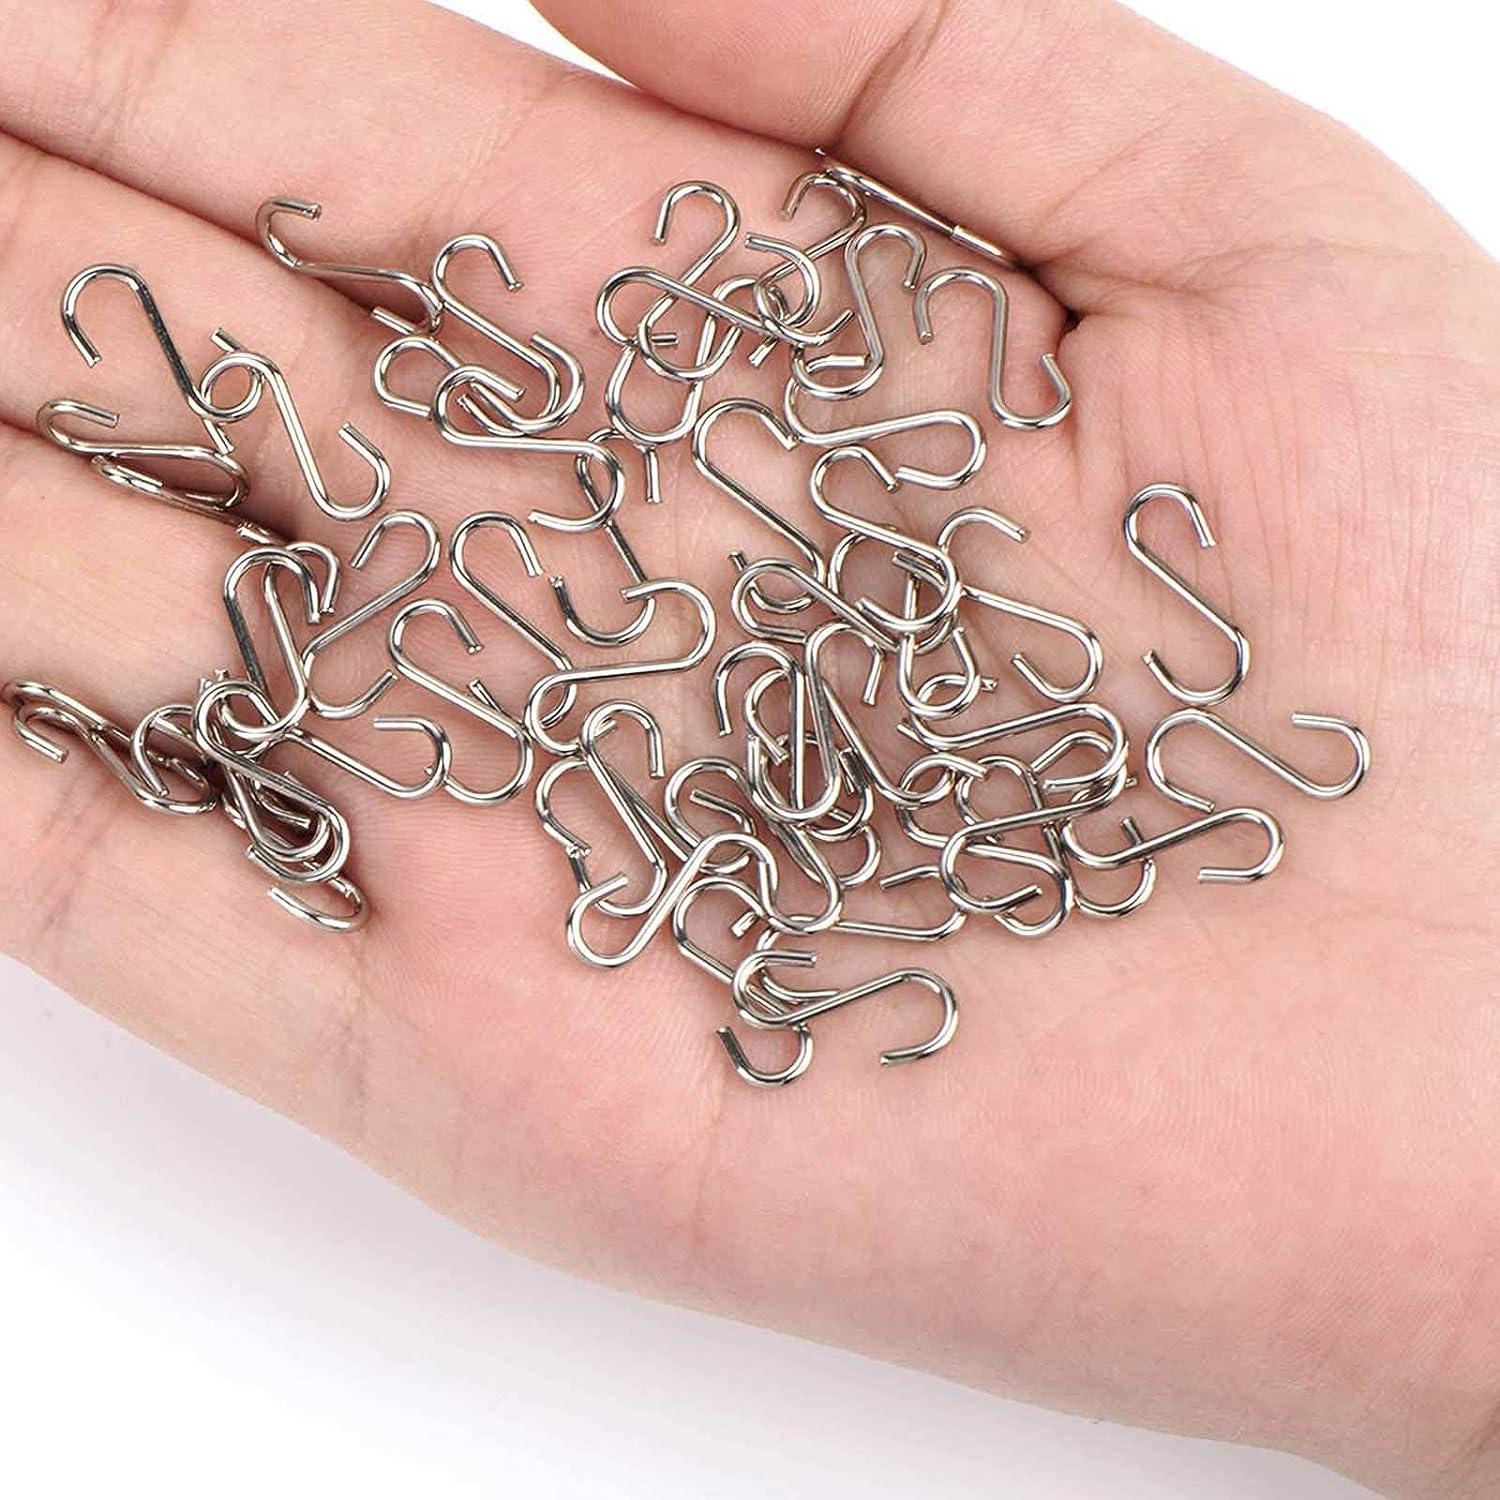 Shappy 100 Pieces 14 x 6 mm/ 0.55 x 0.24 Inch Mini S Hooks Connectors  S-Shaped Wire Hook with Storage Box for DIY Crafts Hanging Jewelry Key  Chain Tags